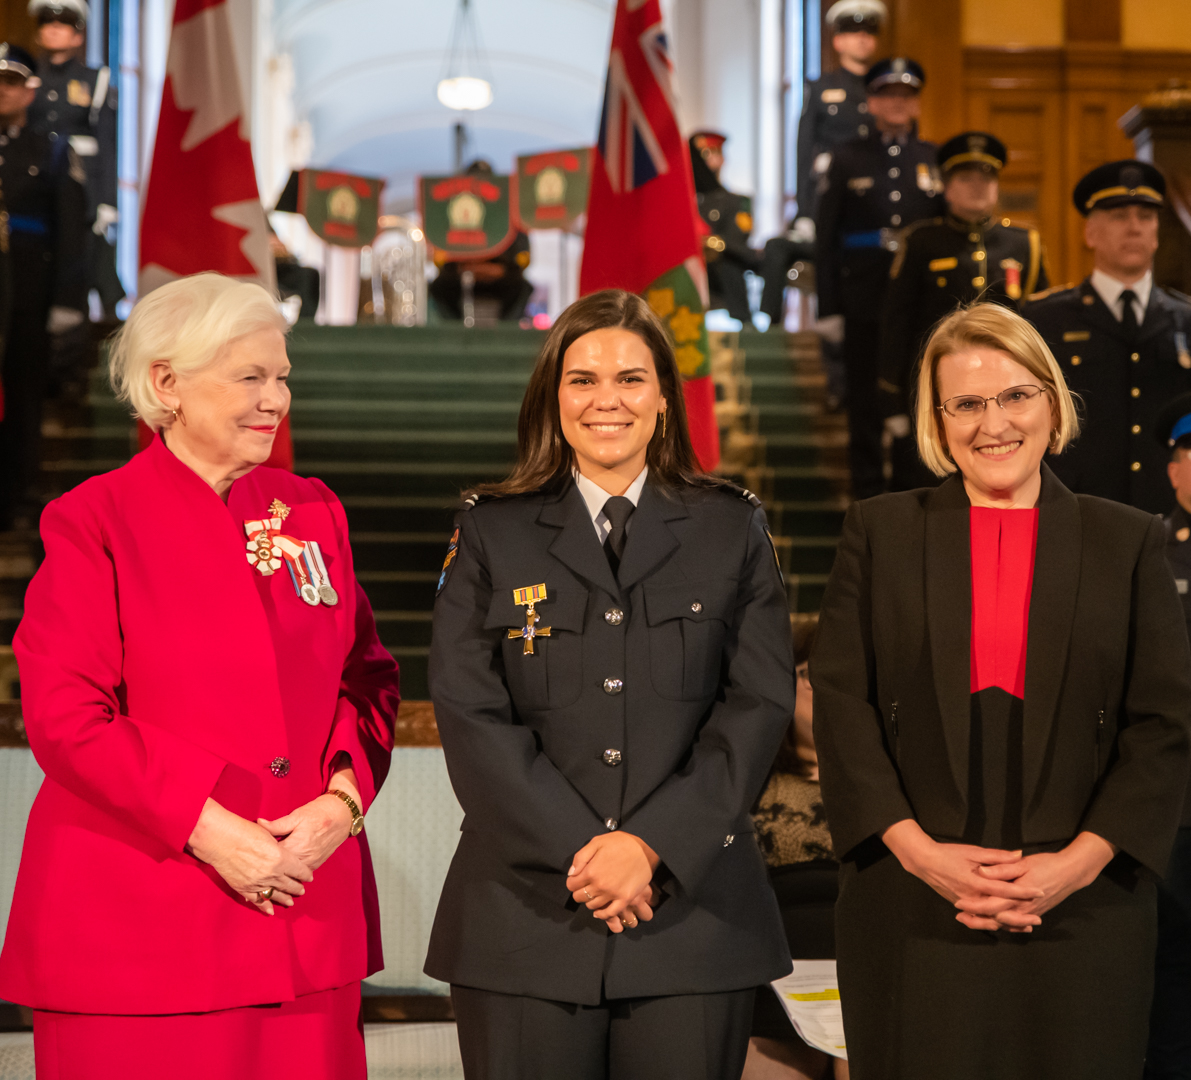 Beatrice Frasca, middle, an advanced care paramedic with the Kawartha Lakes Paramedic Service, received an Ontario Medal for Paramedic Bravery from Ontario Lieu. Gov. Elizabeth Dowdeswelll and Deputy Premier/Minister of Health Sylvia Jones on May 24, 2024.